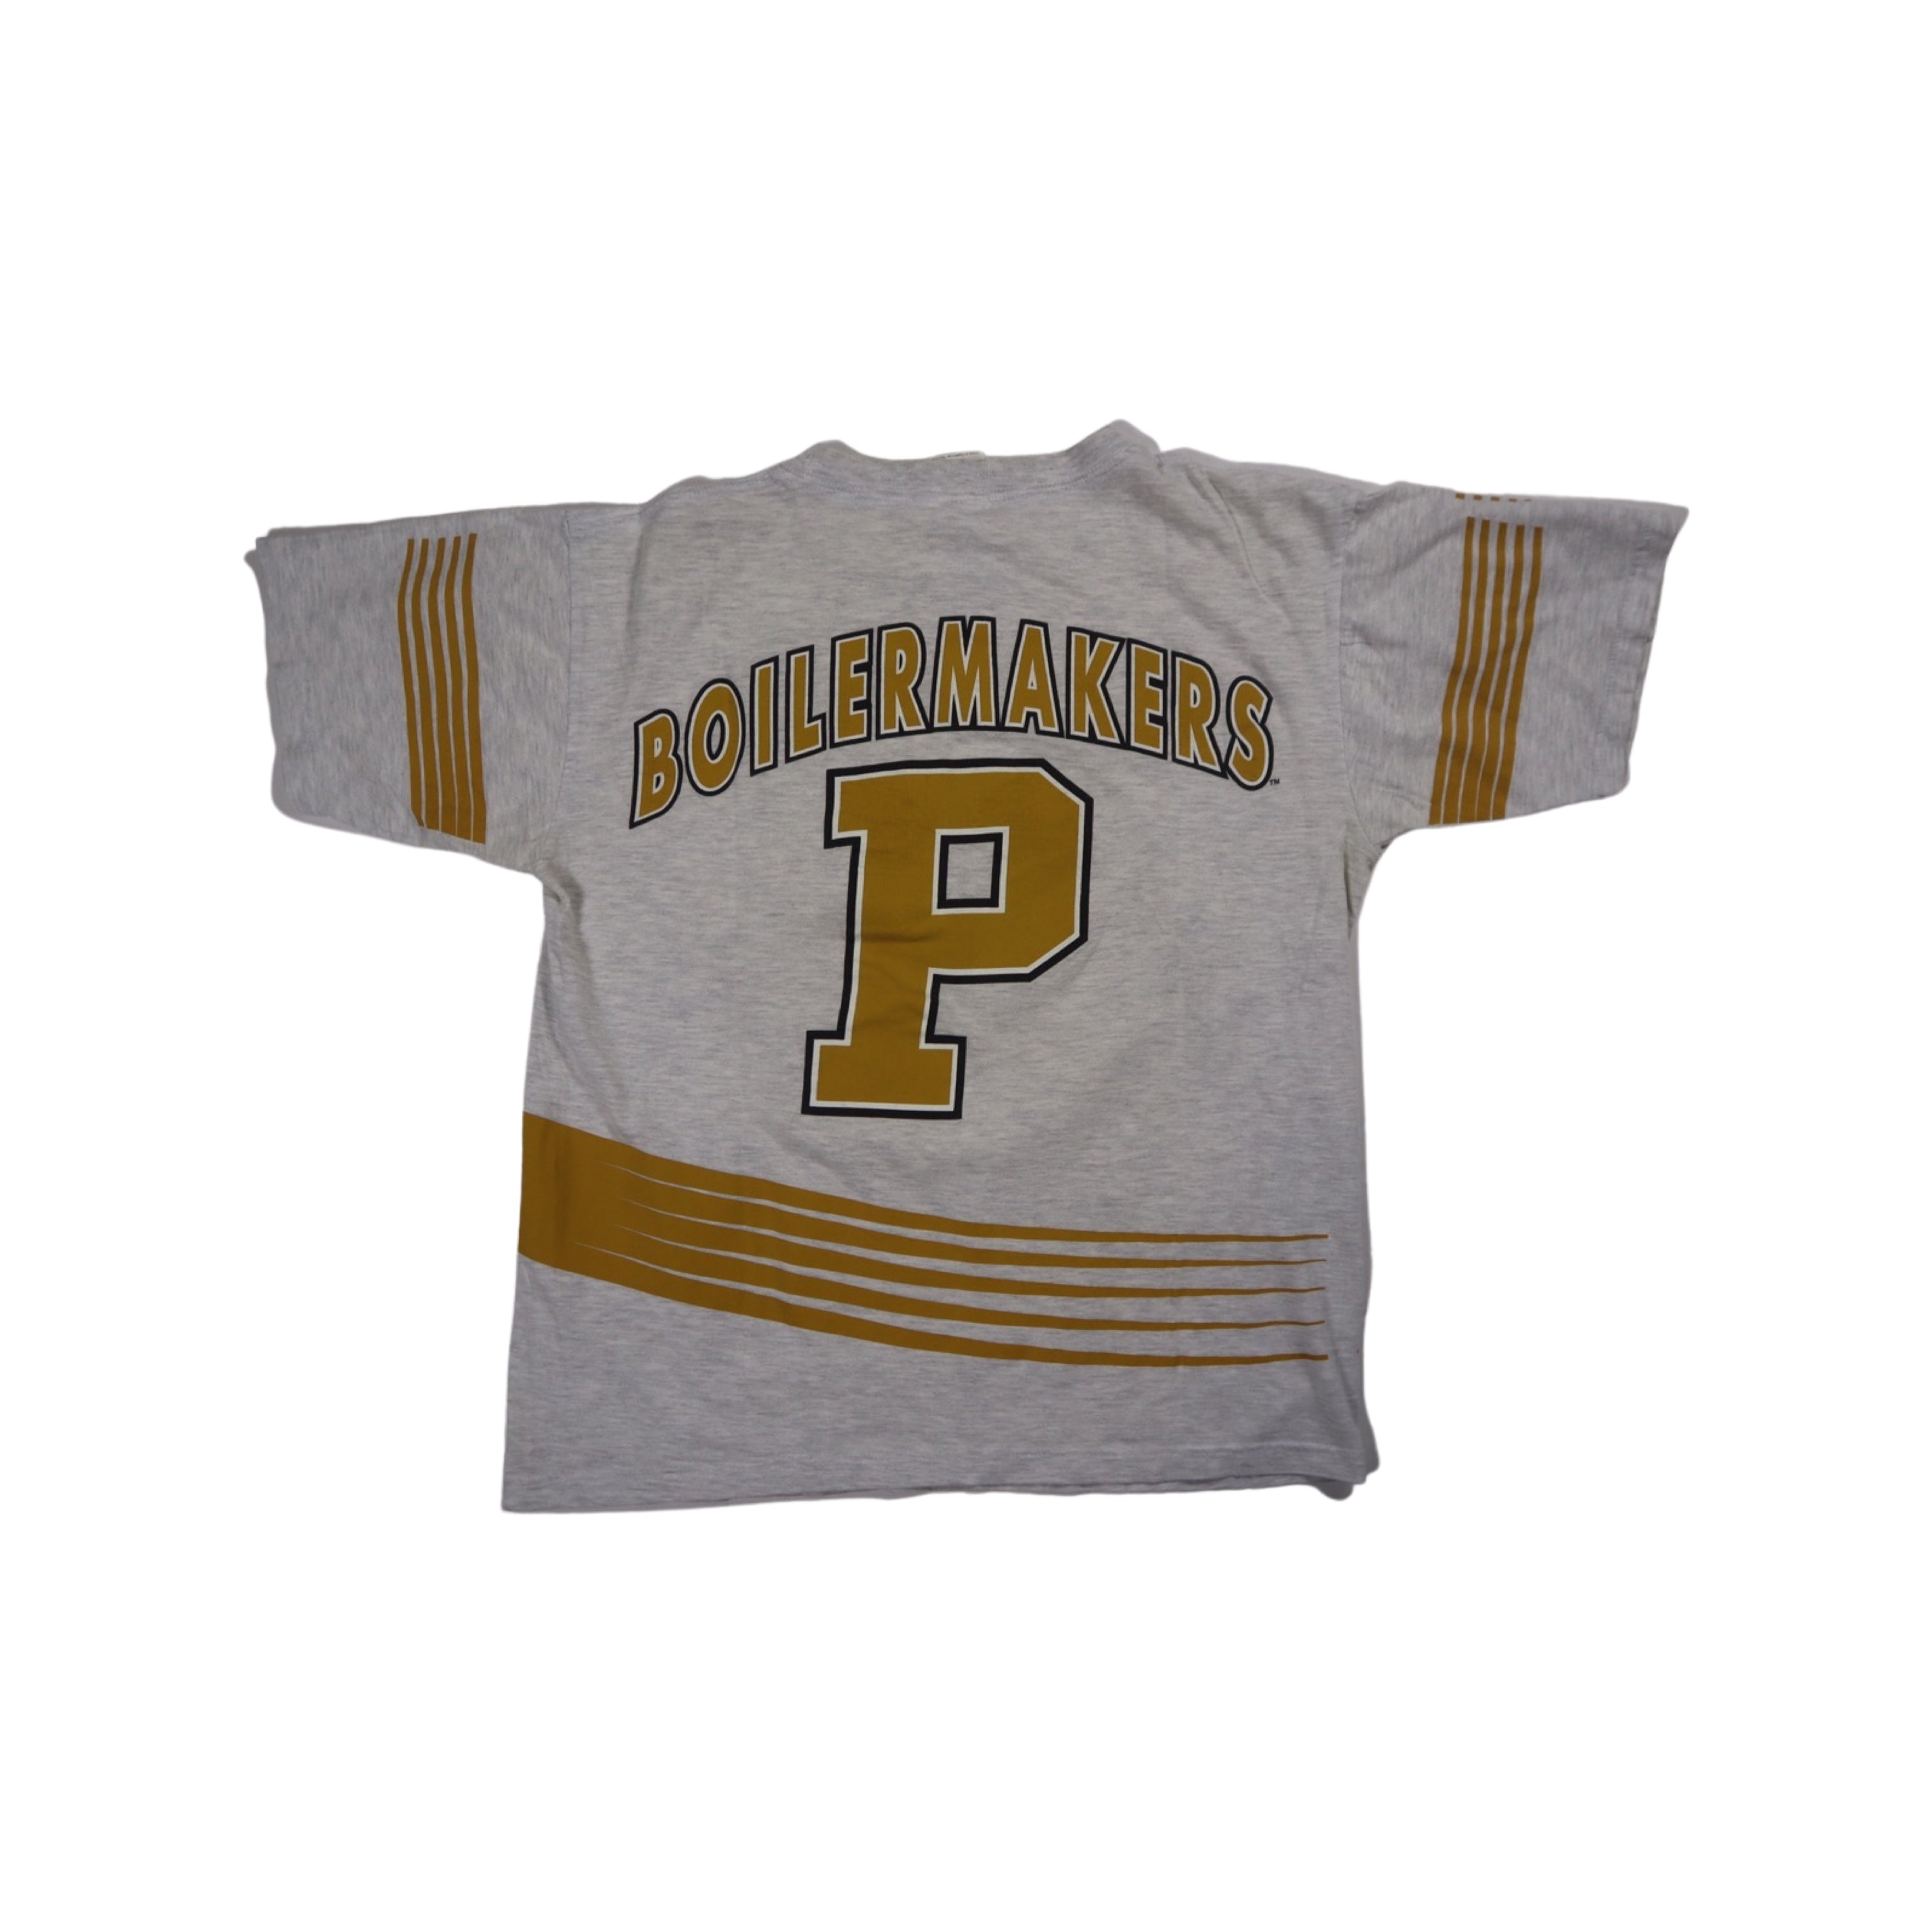 Purdue Boilermakers All-Over Print 90s T-Shirt Grail (Large)